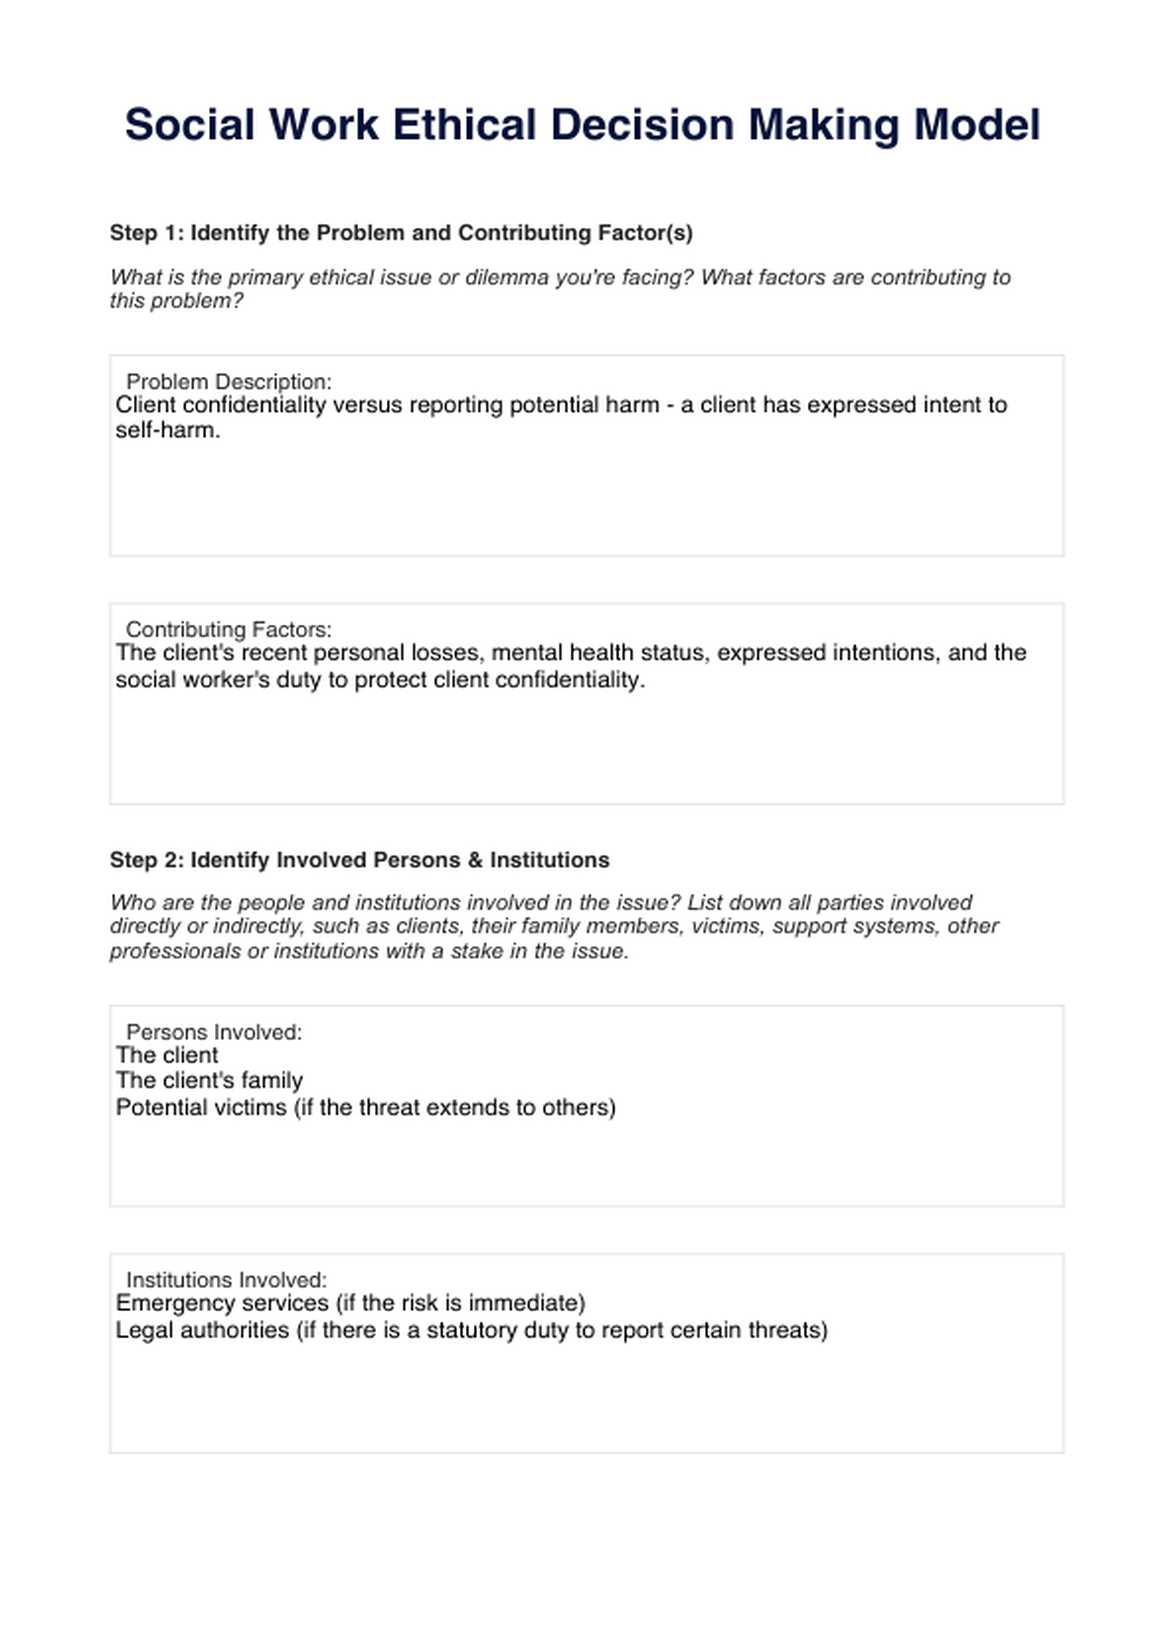 Social Work Ethical Decision Making Model PDF Example